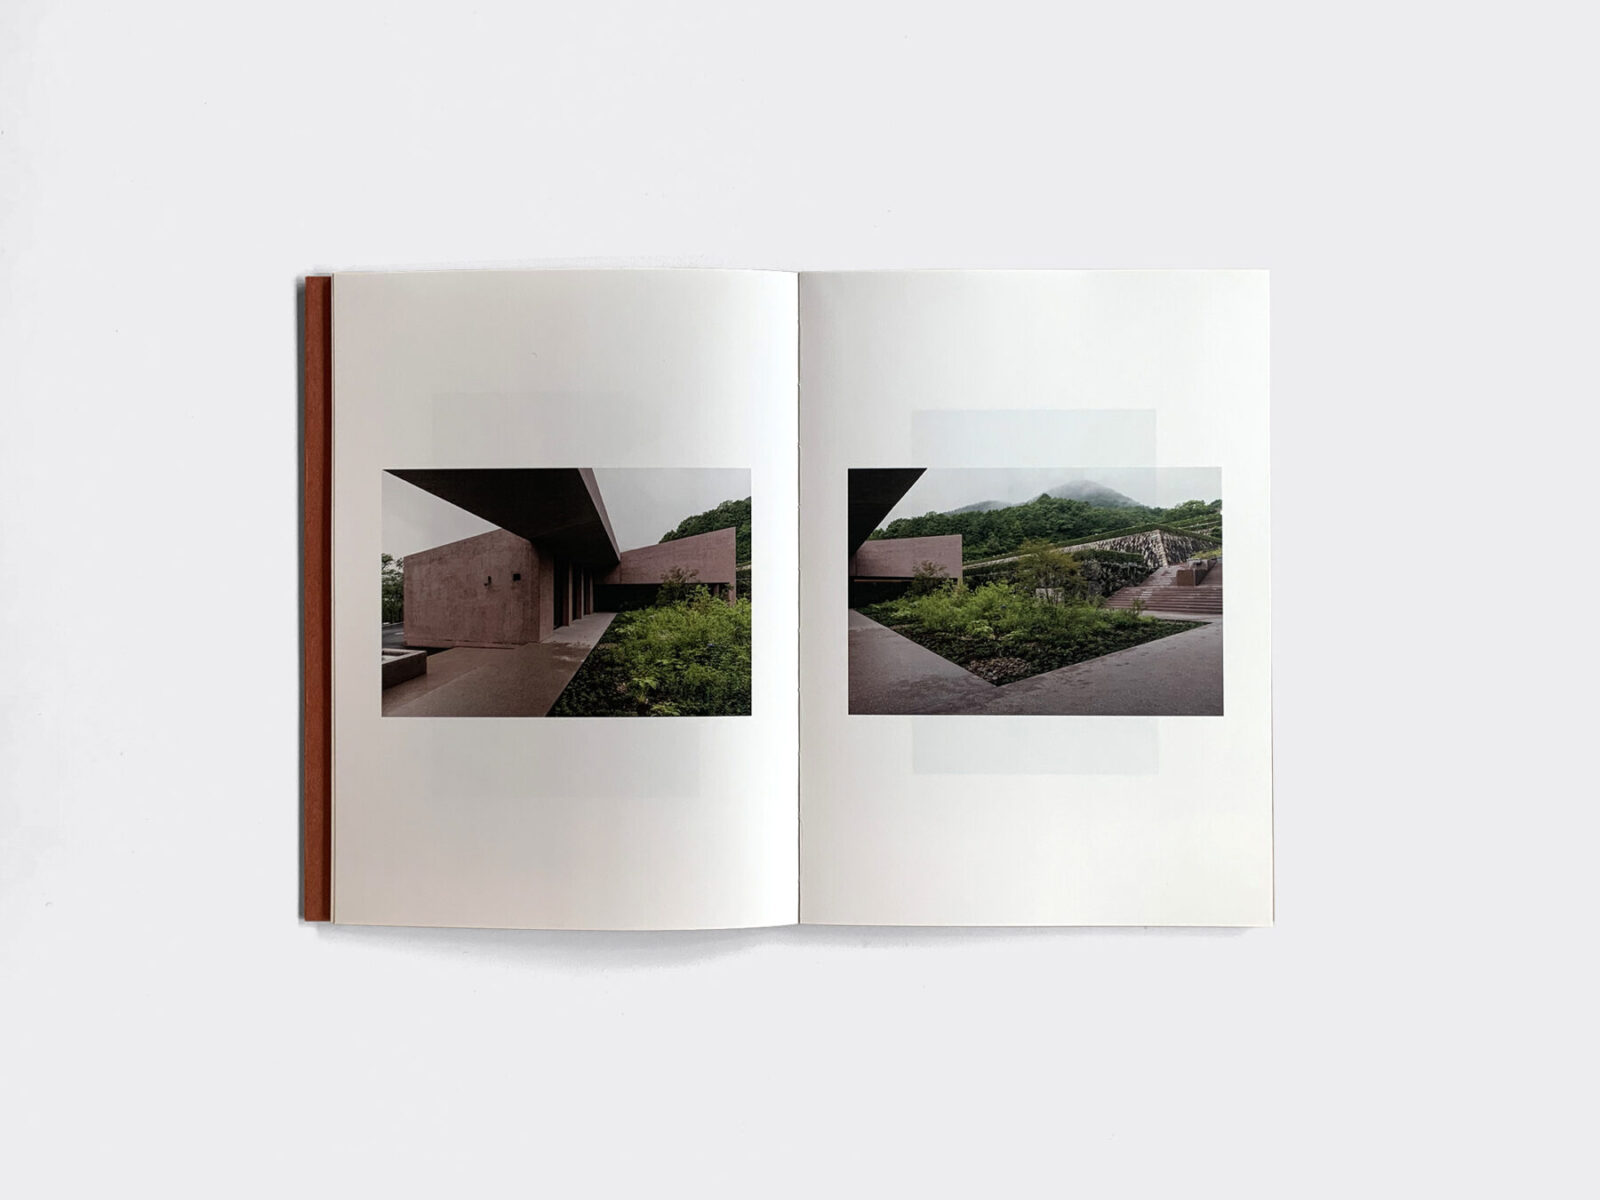 Archisearch Inagawa Cemetery Chapel and Visitor Centre: a new book published on David Chipperfield Architects’ Inagawa Chapel project in Japan